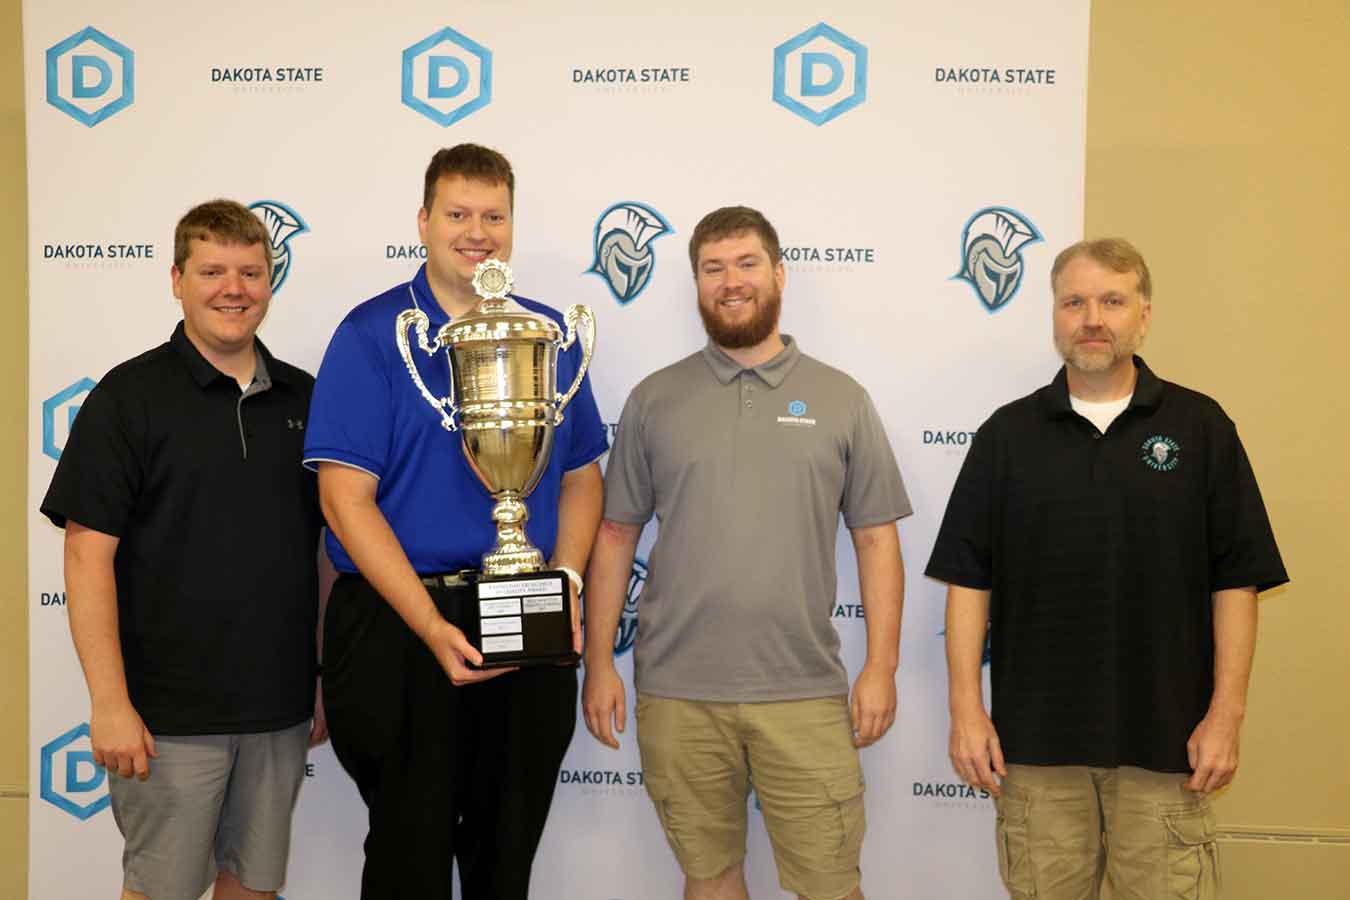 Knowlton Excellence in Quality Award winners (l-to-r): Shawn Zwach, Kyle Korman, Andrew Kramer, and Tom Halverson. Not pictured is Chris Loutsch.